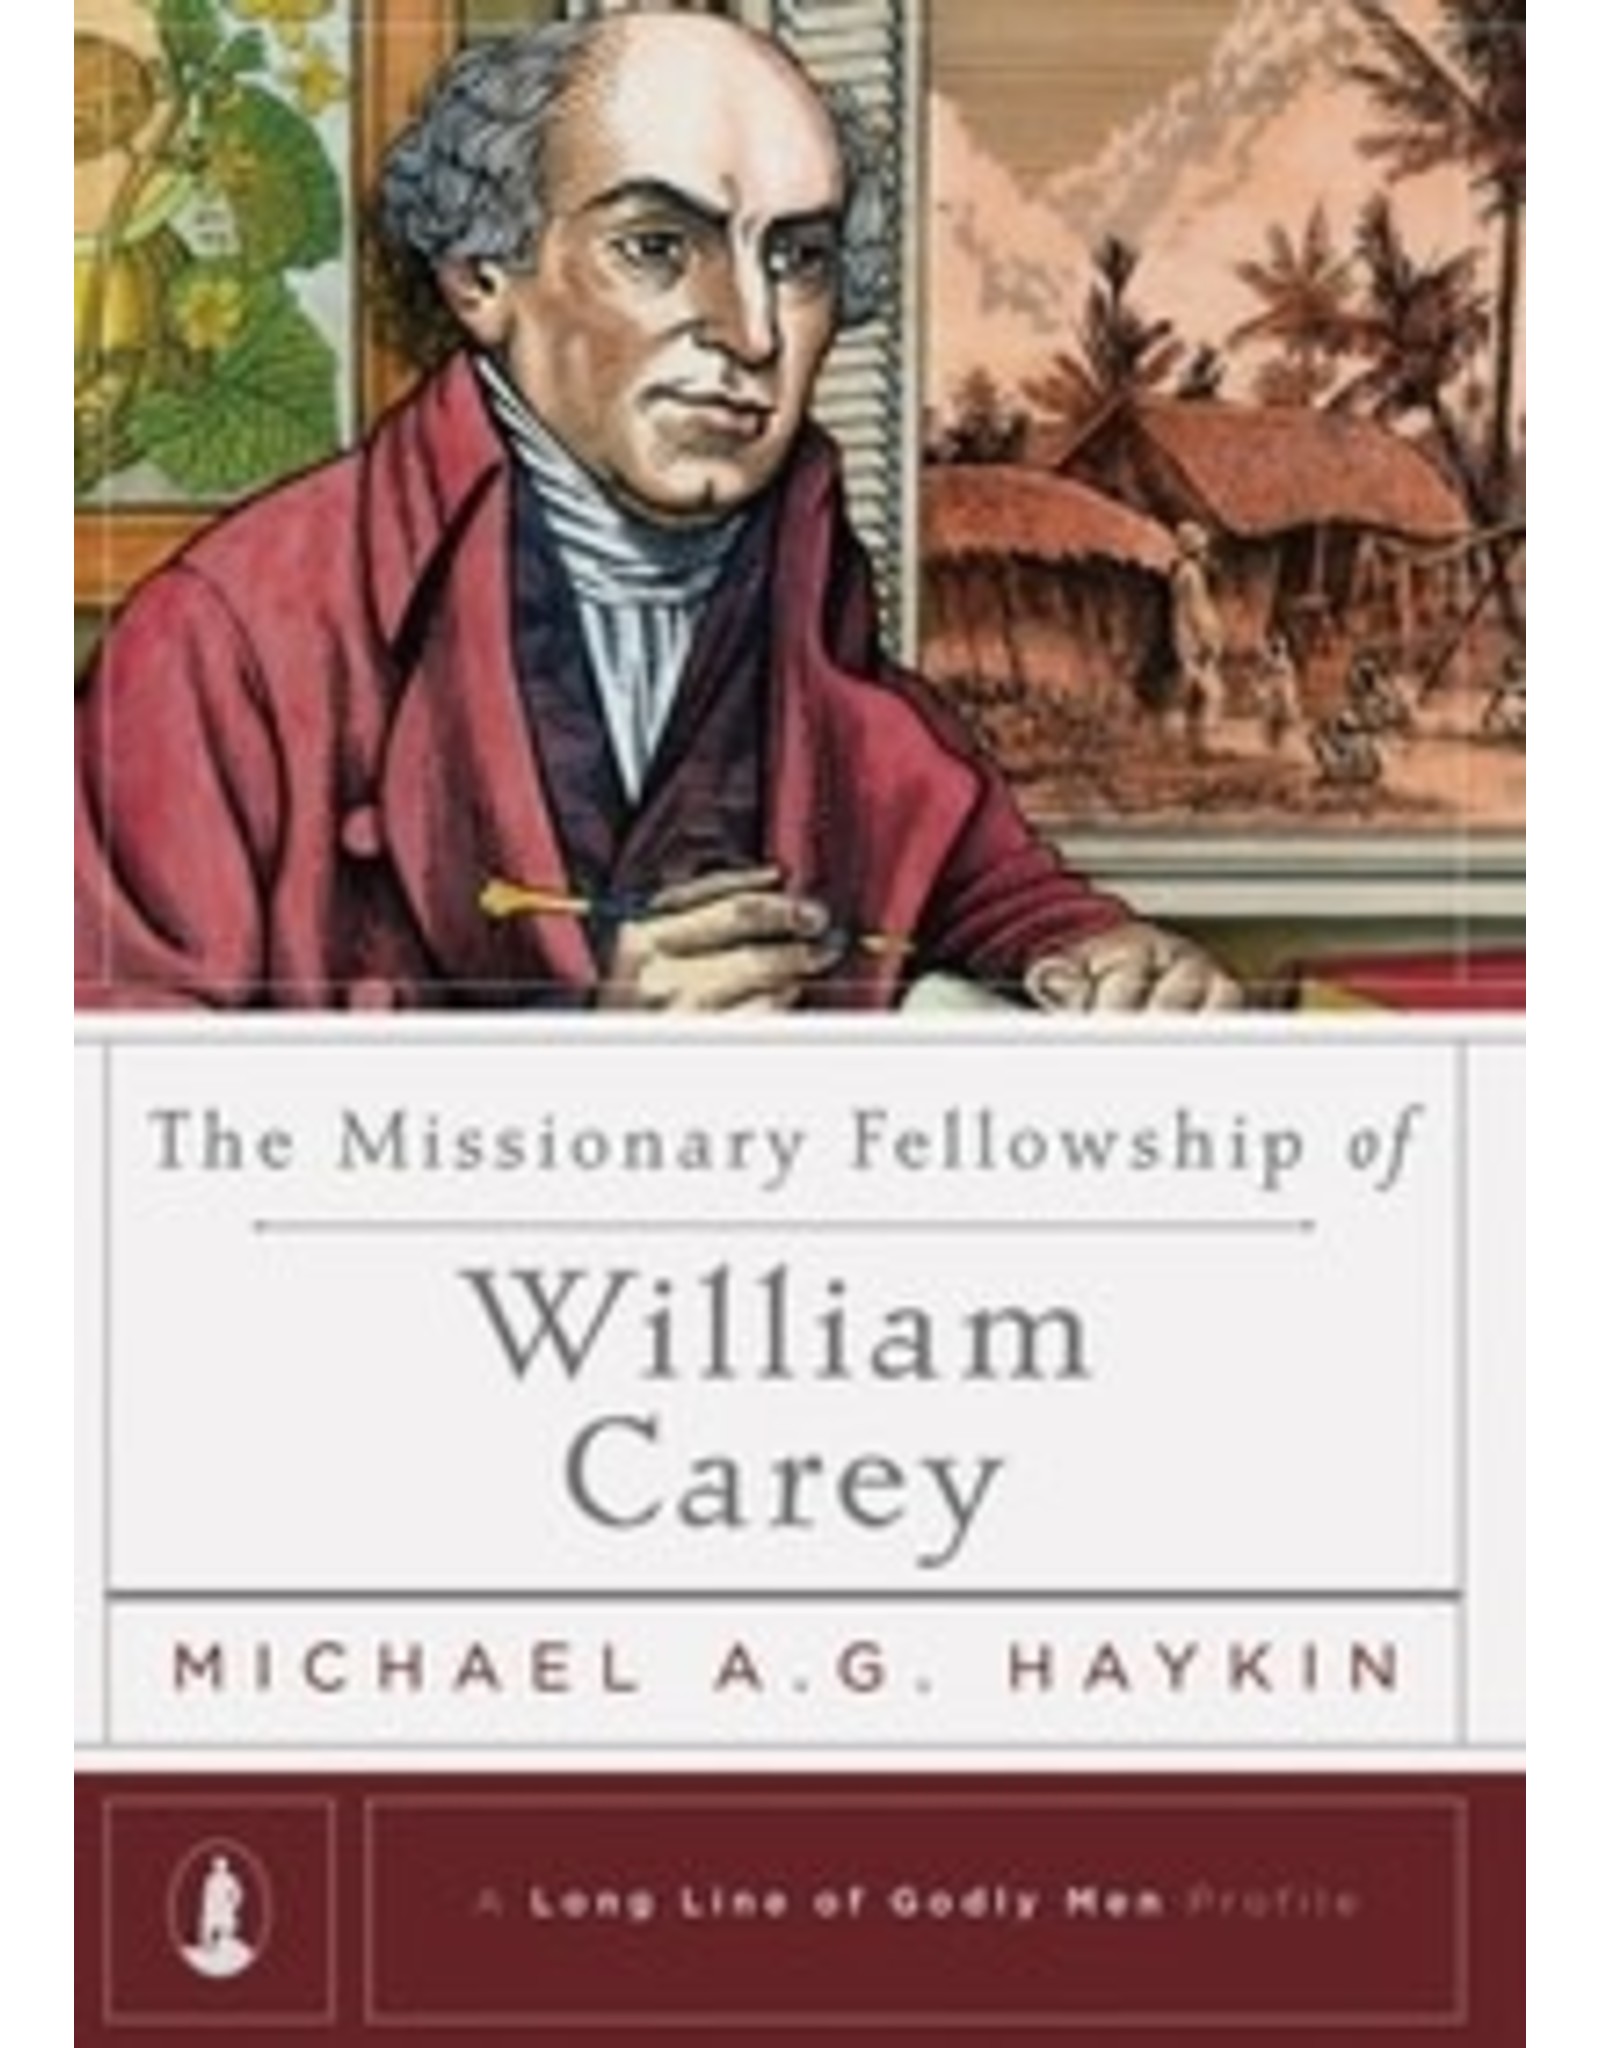 Haykin, Michael A G The Missionary fellowship of William Carey - A Long line of Godly Men